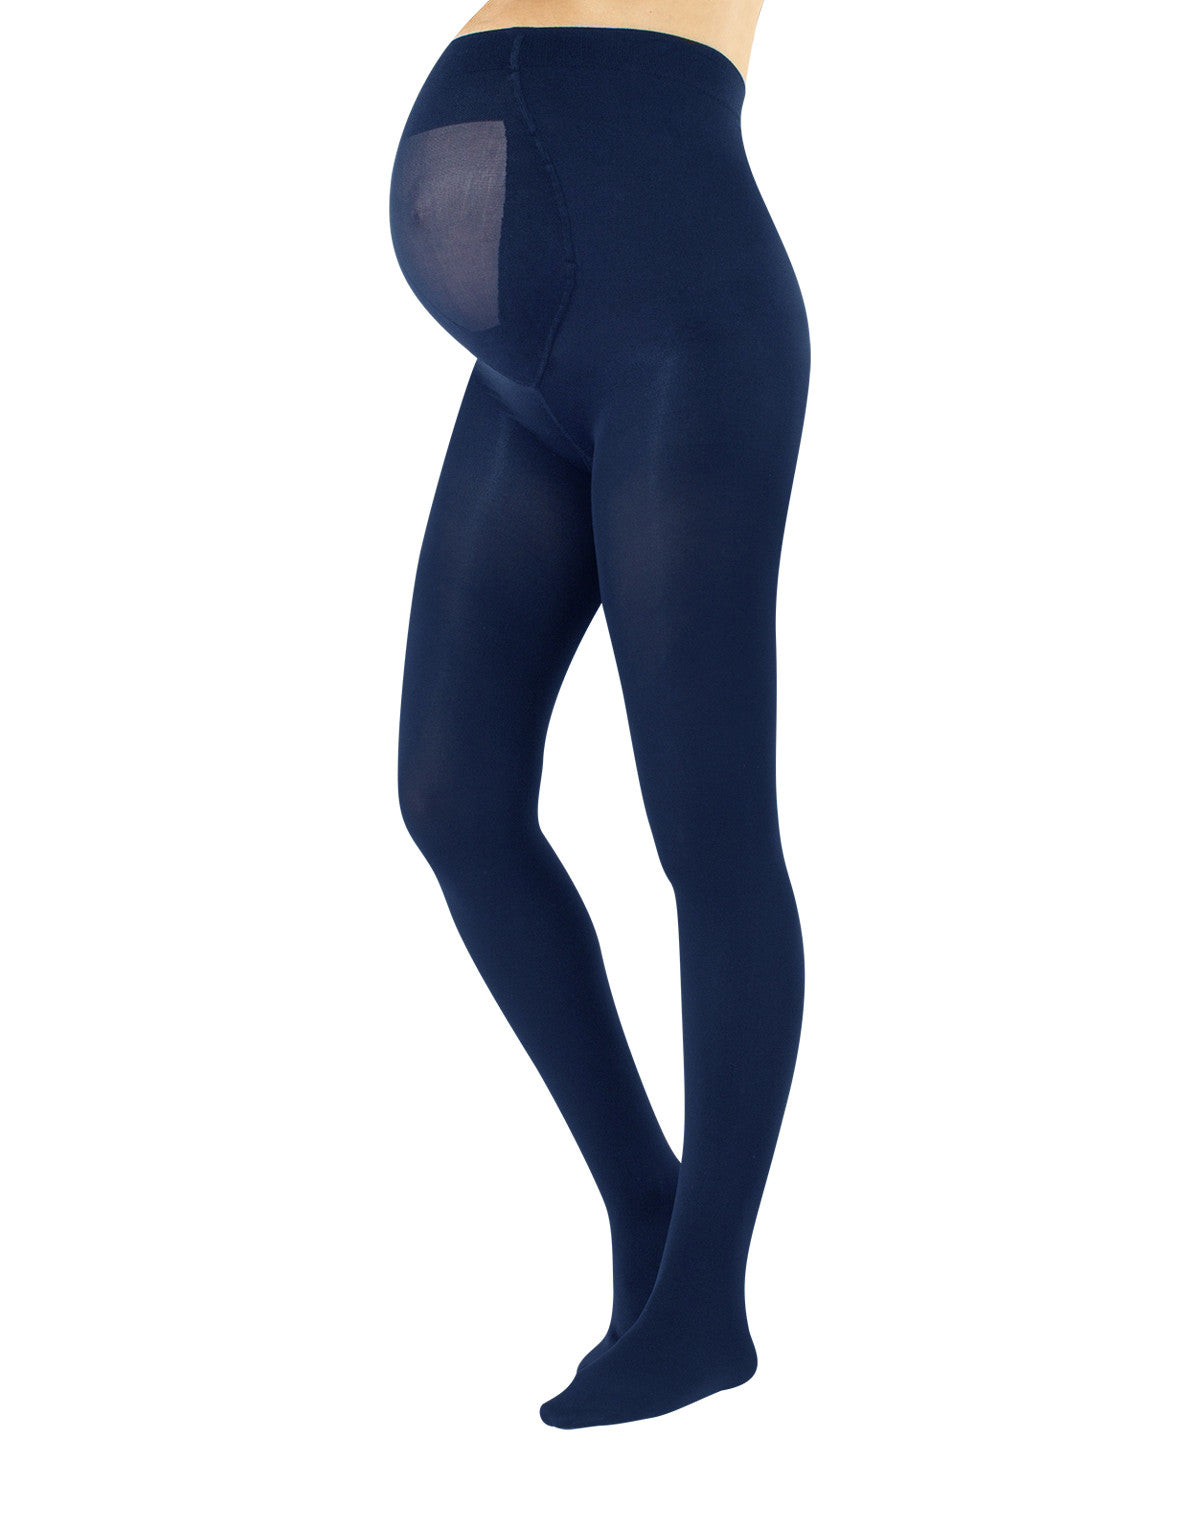 Calzitaly 100 Den Maternity Tights - Navy blue ultra opaque pregnancy tights with an extra panel and flat seam.